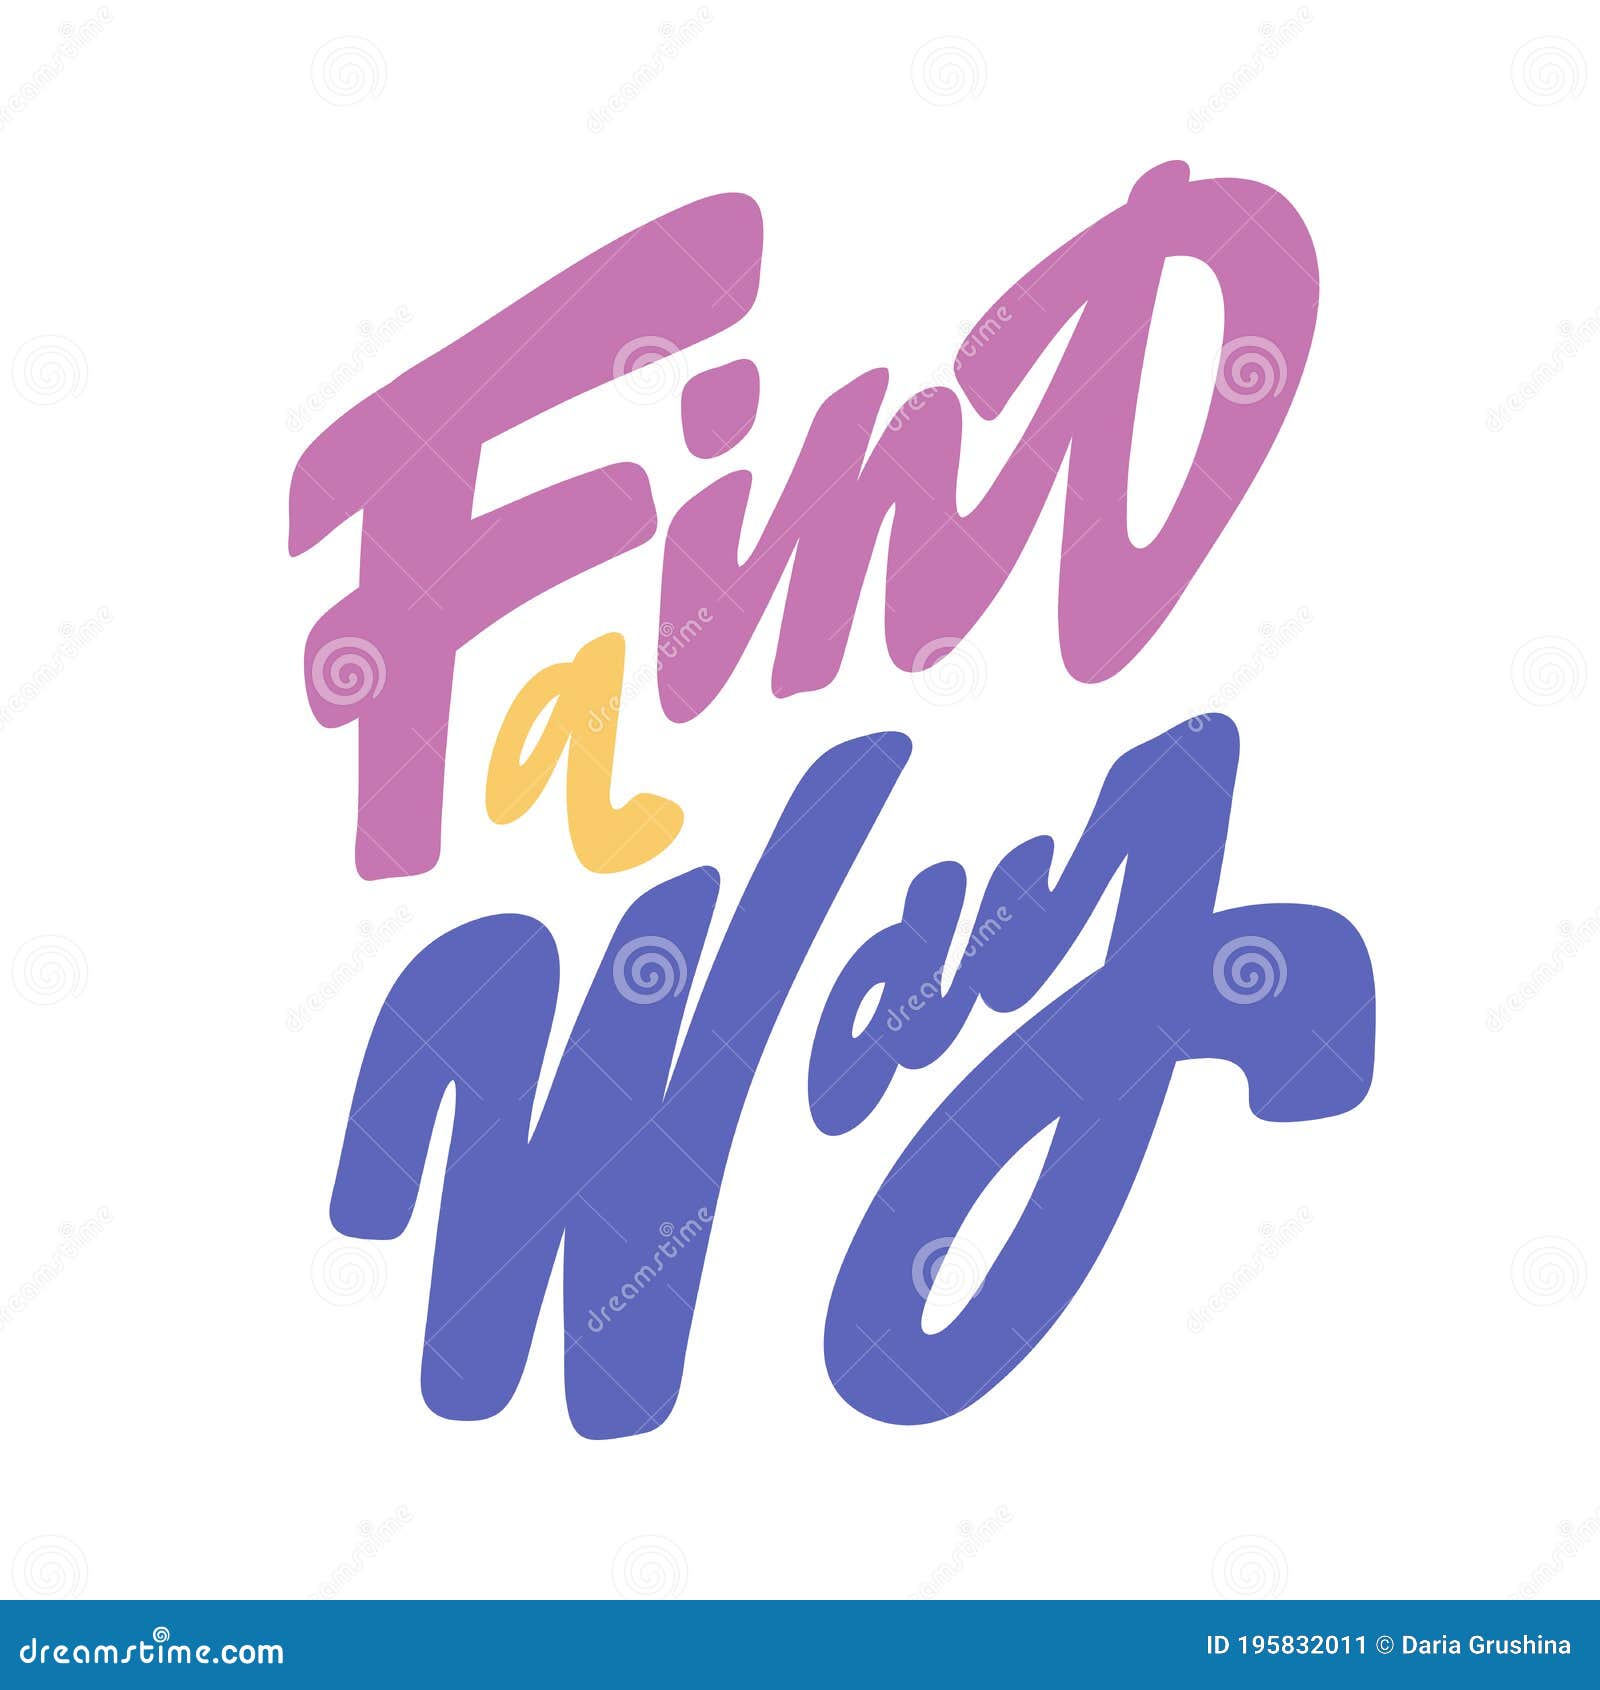 Find A Way Vector Hand Drawn Calligraphic Design Poster Good For Wall 